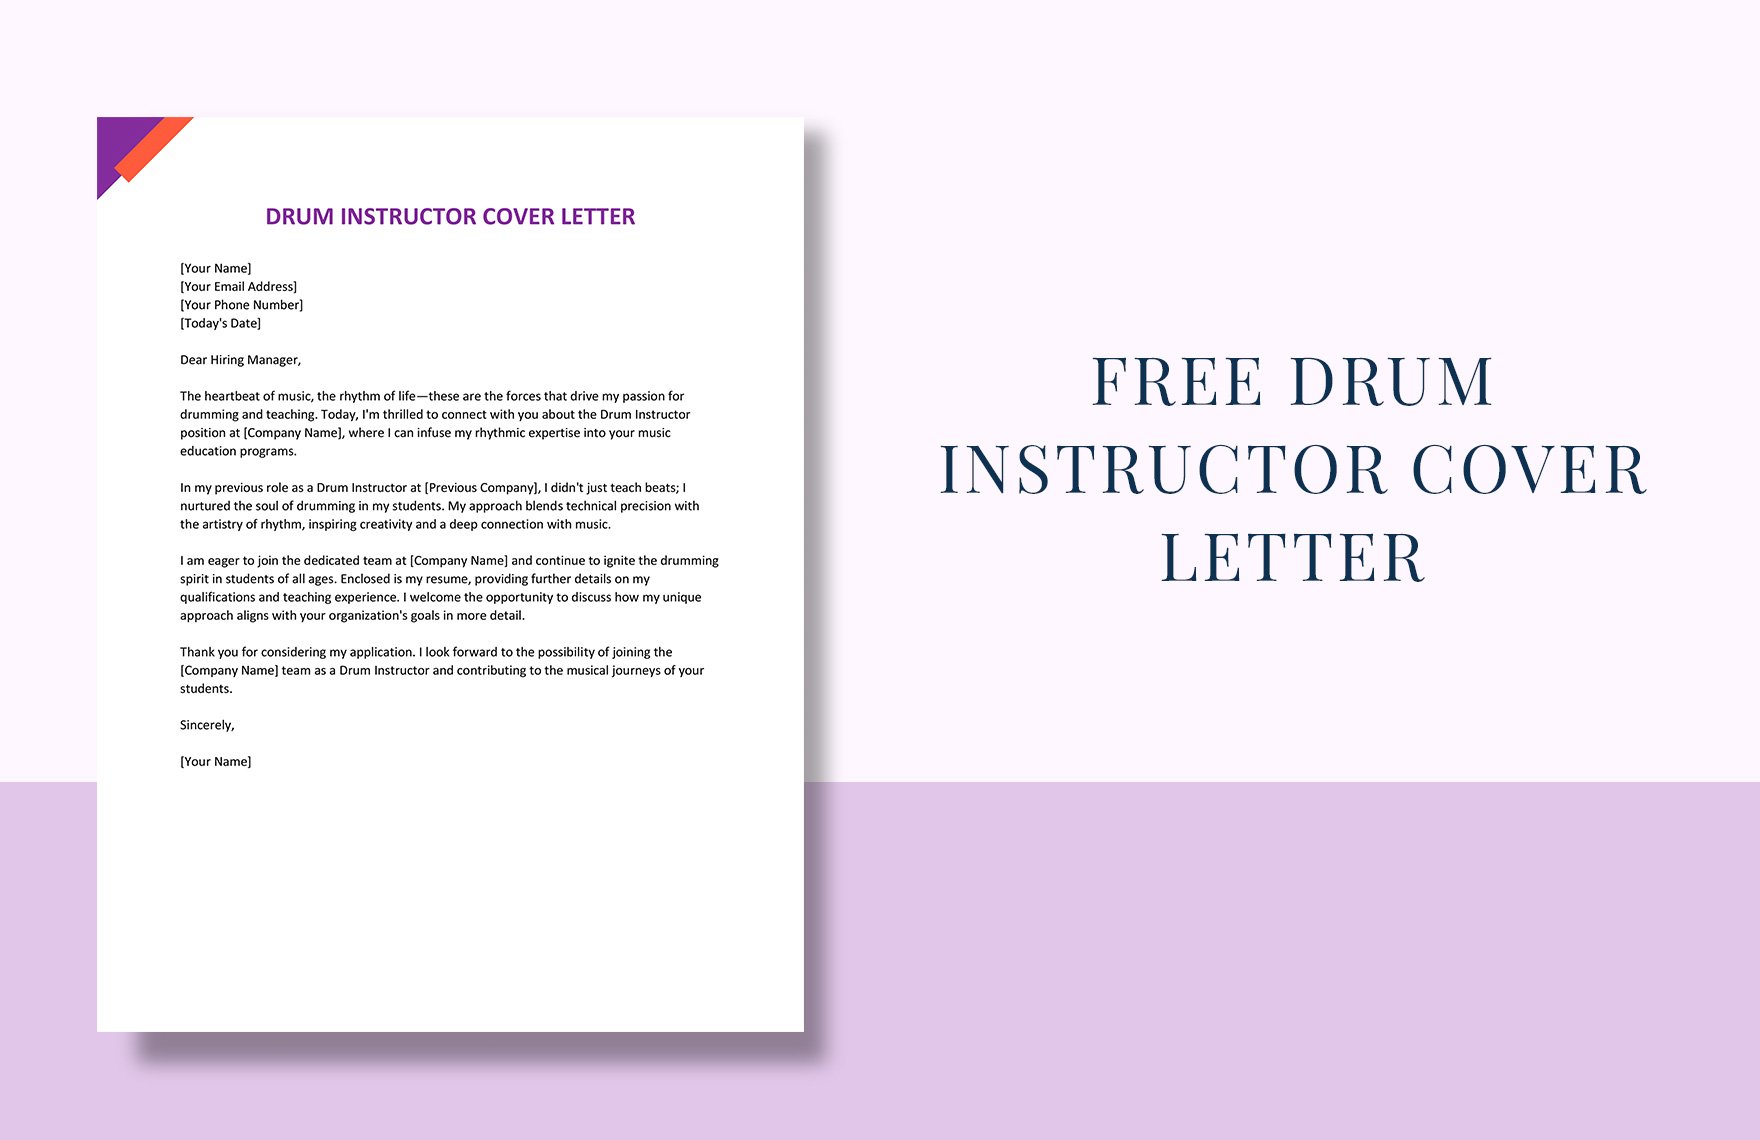 Drum Instructor Cover Letter